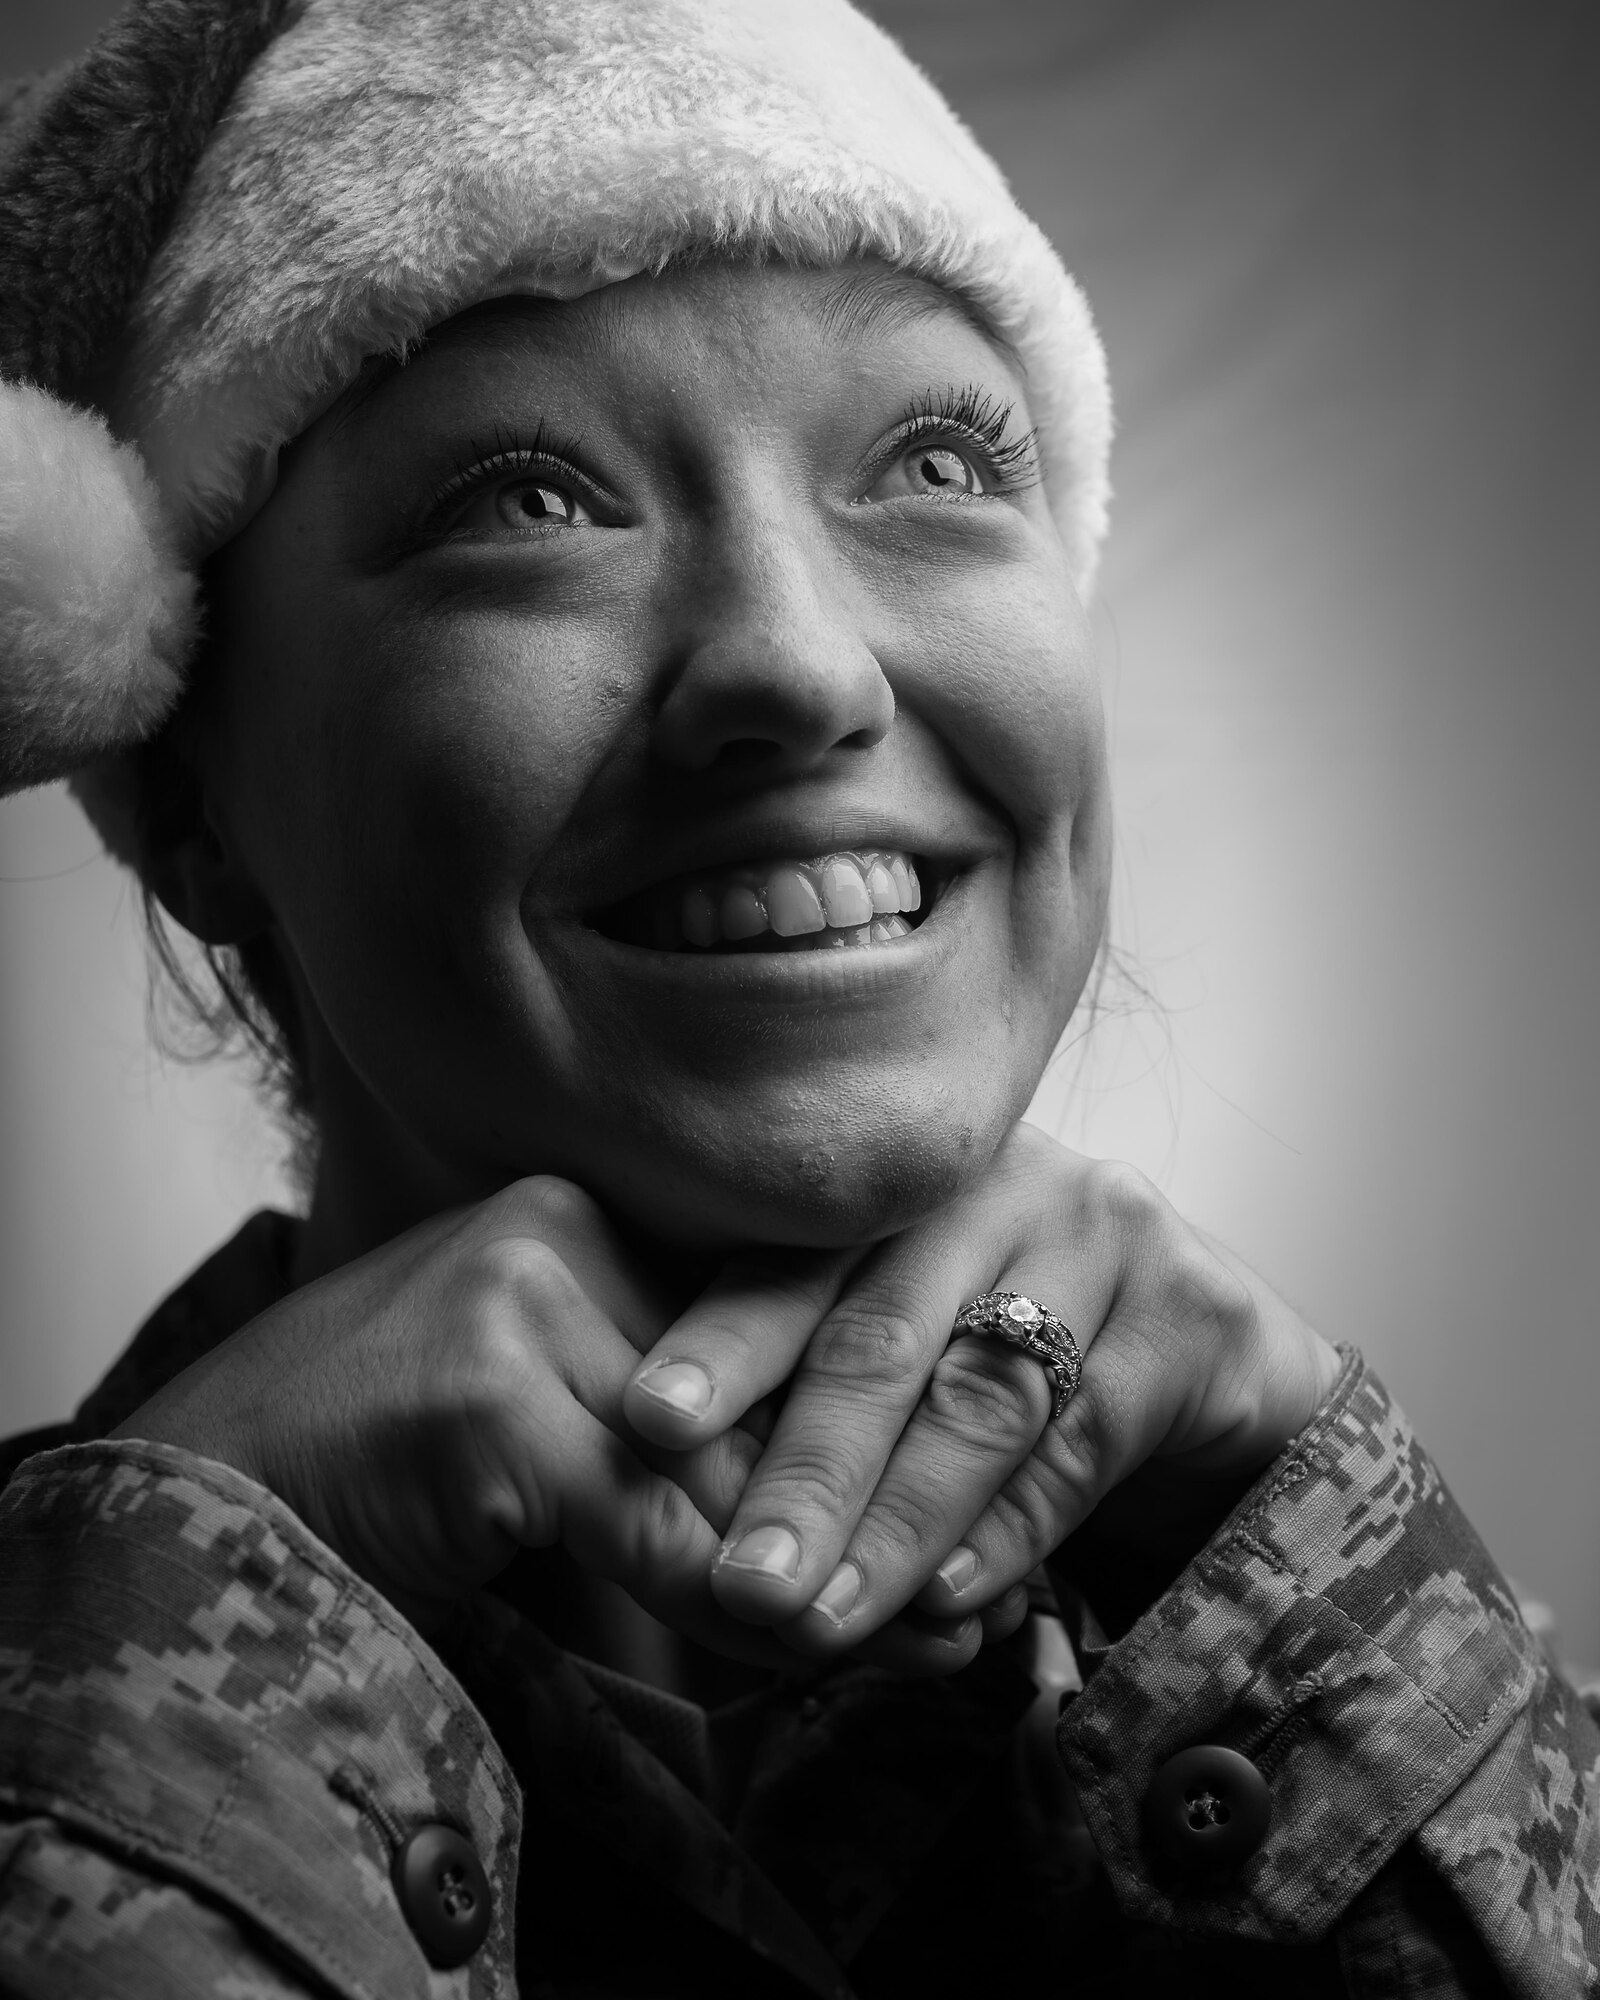 727th Expeditionary Air Control Squadron weapons director Senior Airman Jordan participates in a resiliency project at the 380th Air Expeditionary Wing, Dec. 19, 2016. Deployed Airmen were asked questions regarding resilience through the holidays. “The holidays are super important to me. But, it’s not where you are at that makes a holiday. It’s who you are with, the friends you make and the people who make you smile,” Senior Airman Jordan said.